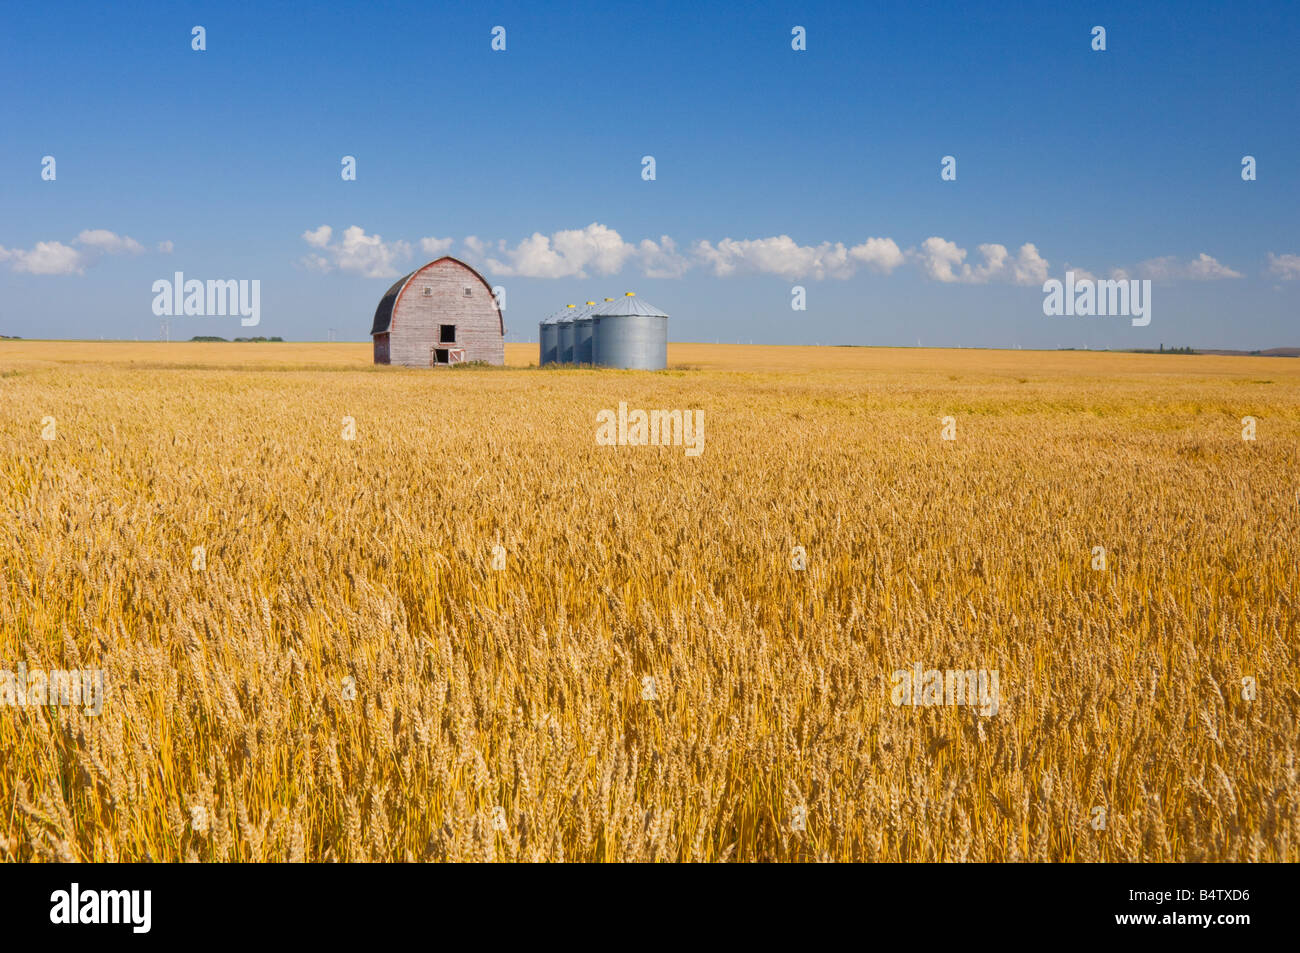 A ripe wheat field with an old barn and grain storage bins near Bruxelles, Manitoba Canada Stock Photo